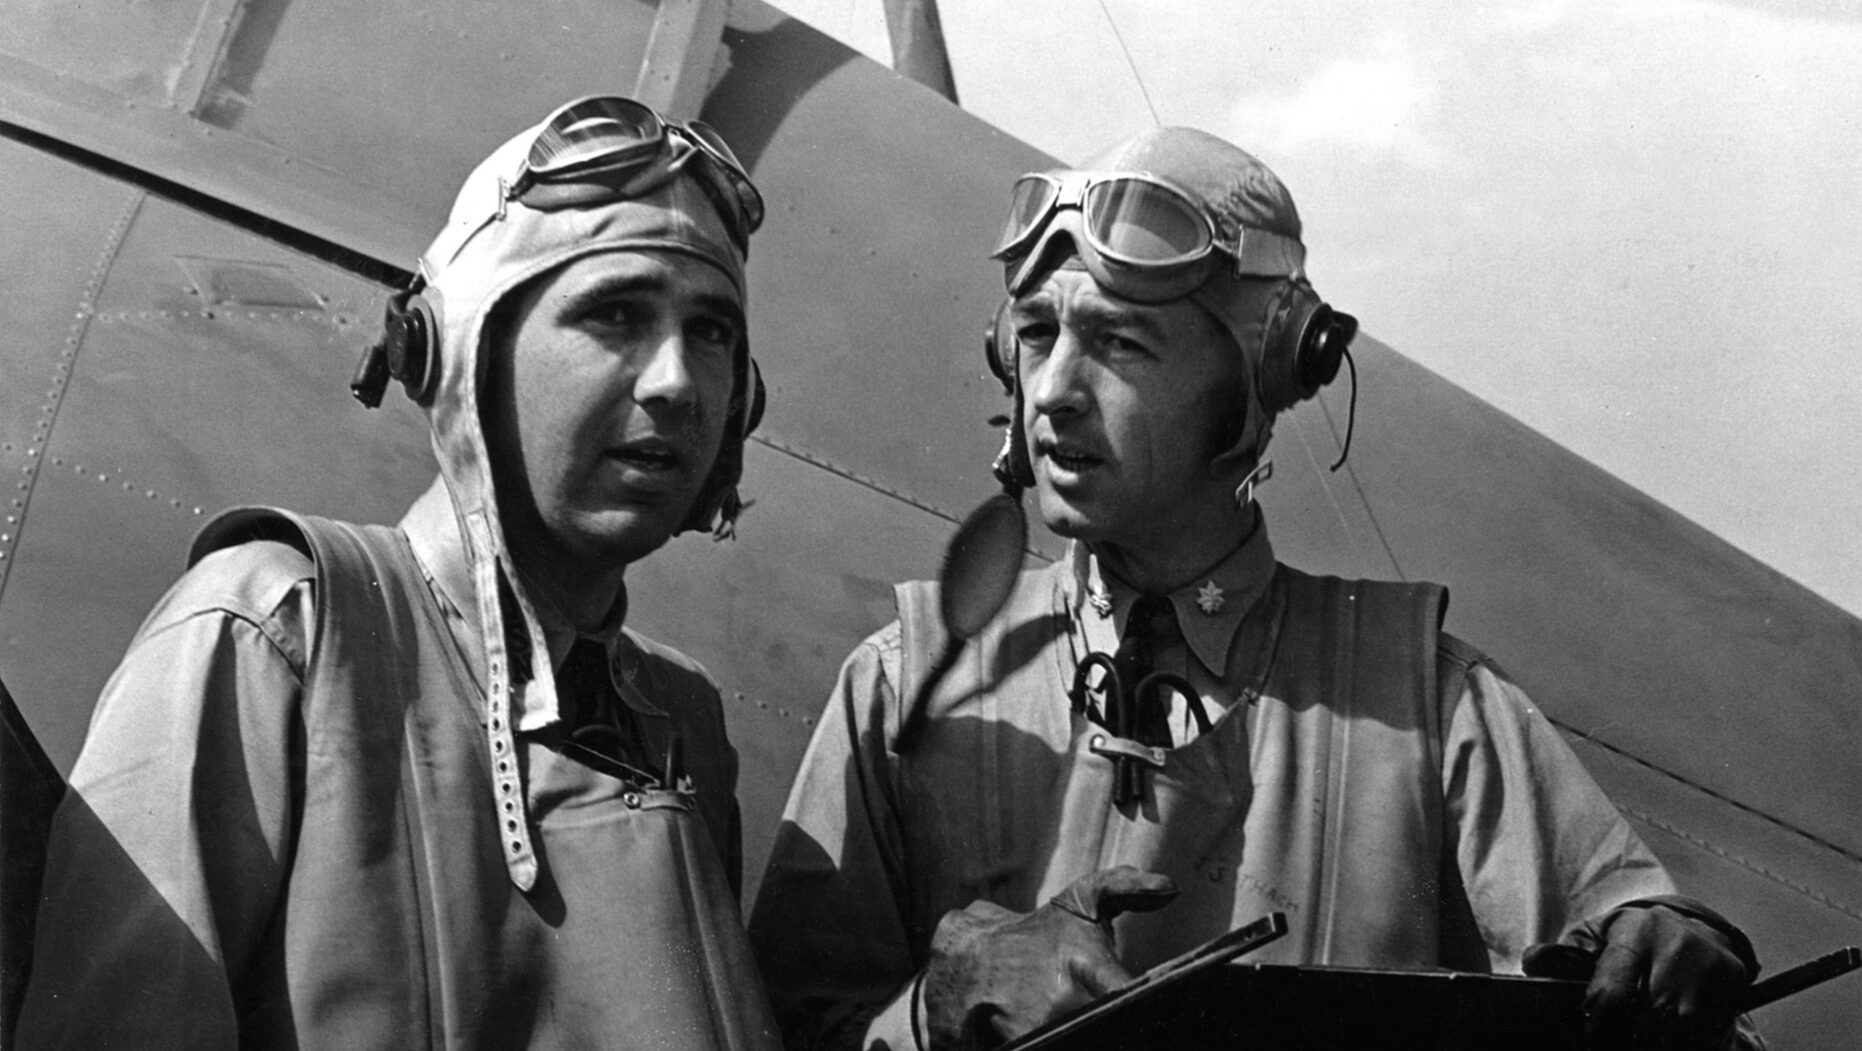 O’Hare (left) discusses fighter tactics with a fellow pilot after returning from a mission.